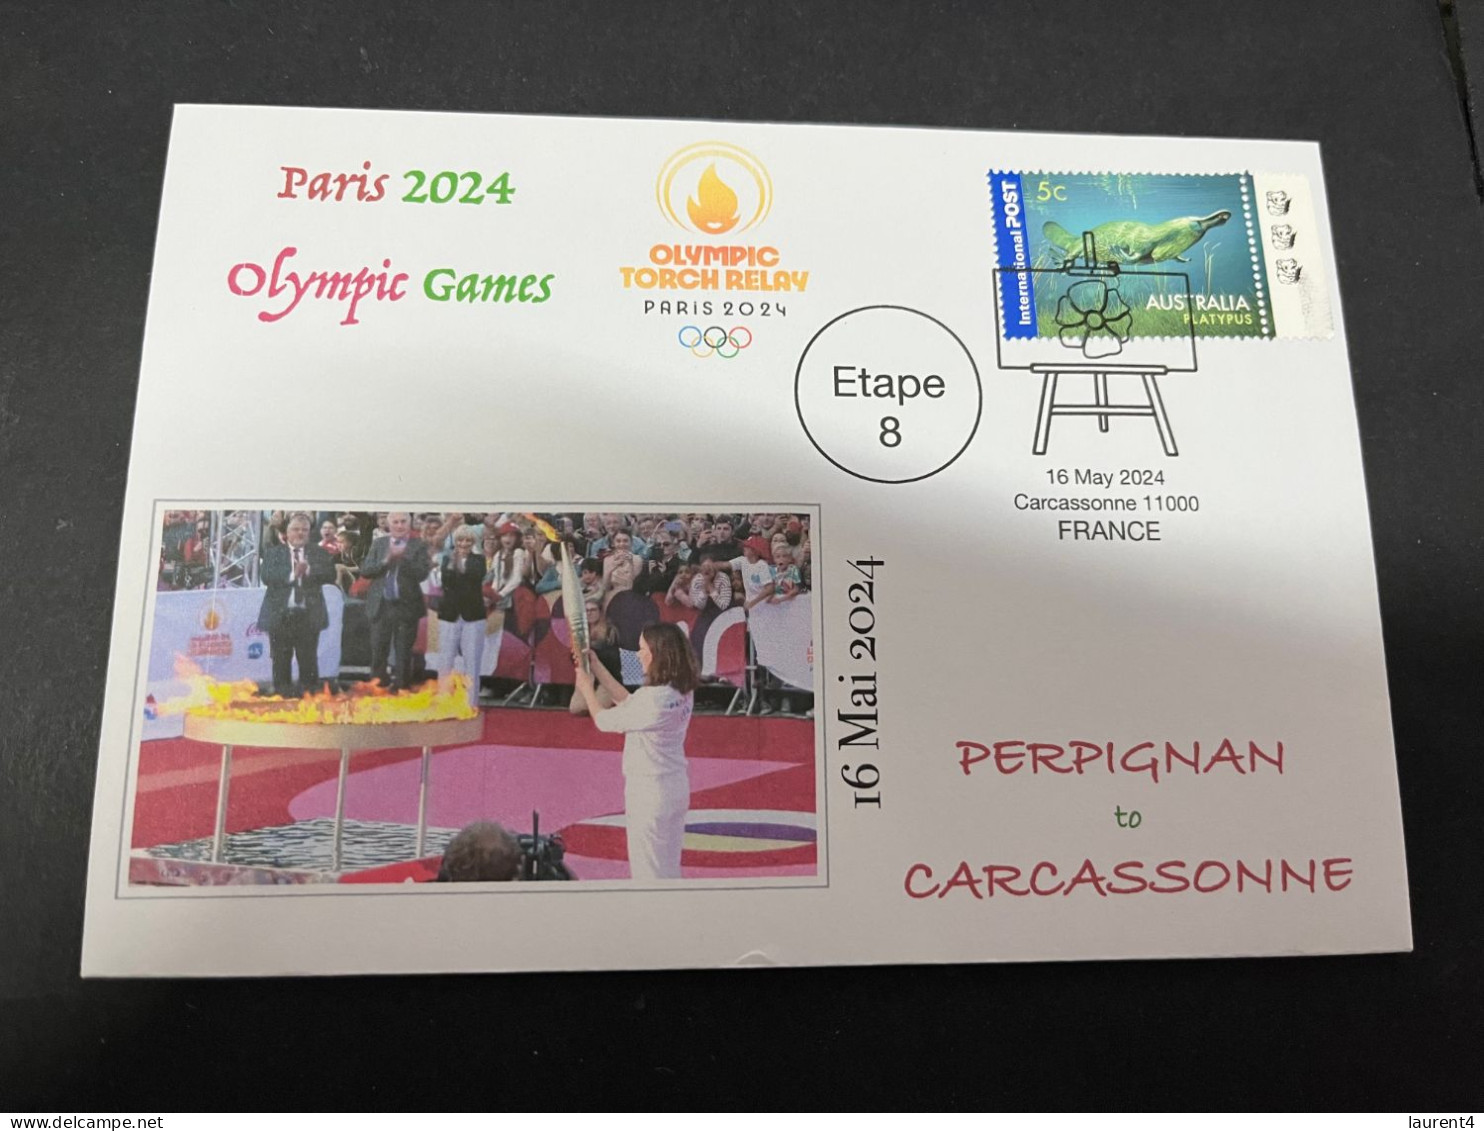 17-5-2024 (5 Z 17) Paris Olympic Games 2024 - Torch Relay (Etape 8) In Carcassonne (16-5-2024) With OZ Stamp - Zomer 2024: Parijs